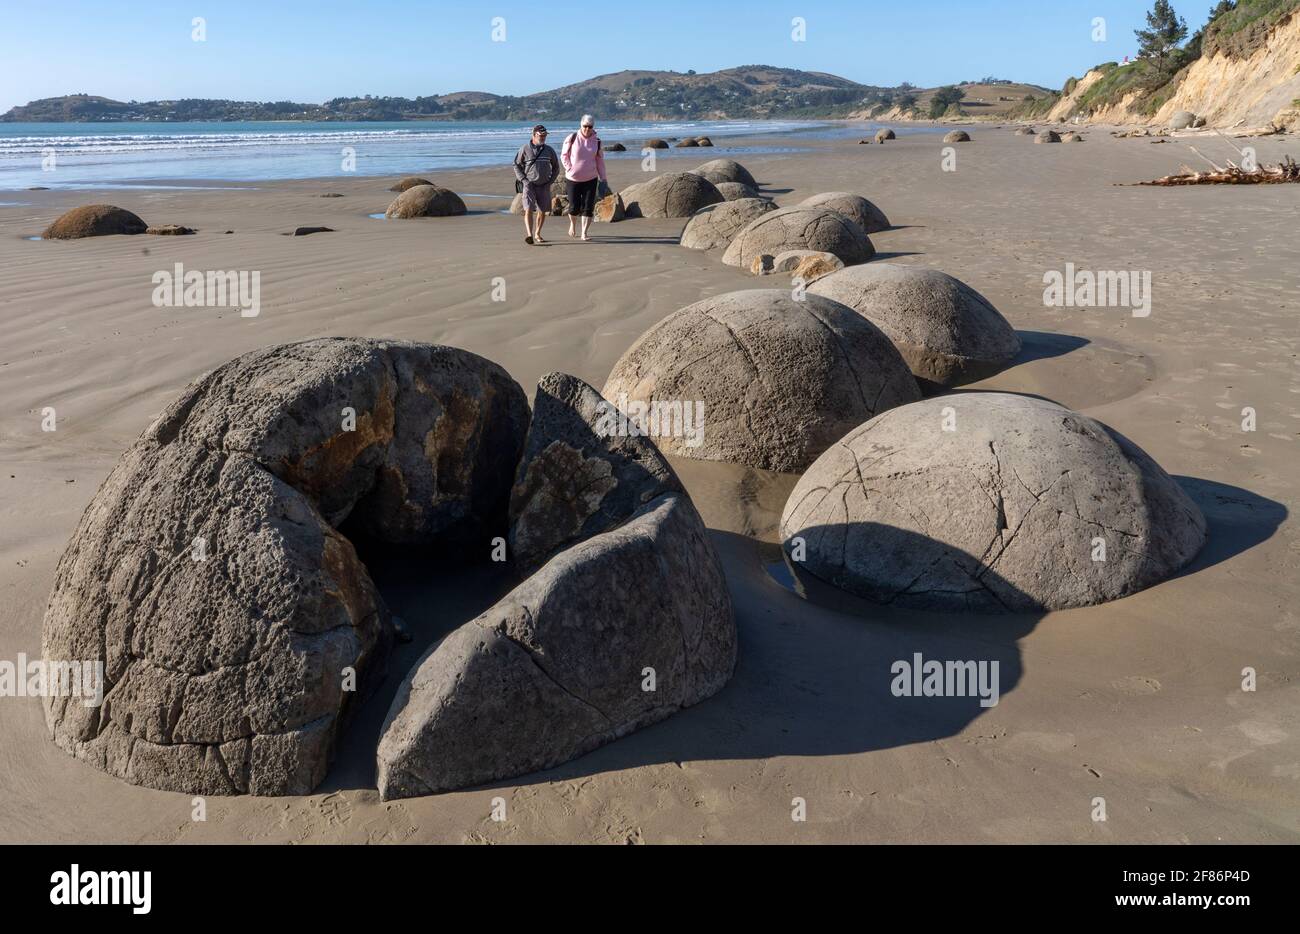 Moeraki Boulders, Moeraki, New Zealand, 1 April, 2021 - The Moeraki Boulders are unusually large and spherical boulders lying along a stretch of Koekohe Beach on the wave-cut Otago coast of New Zealand between Moeraki and Hampden. They occur scattered either as isolated or clusters of boulders within a stretch of beach where they have been protected in a scientific reserve. Photo shows tourist studying the boulders. Credit: Rob Taggart/Alamy Stock Photo